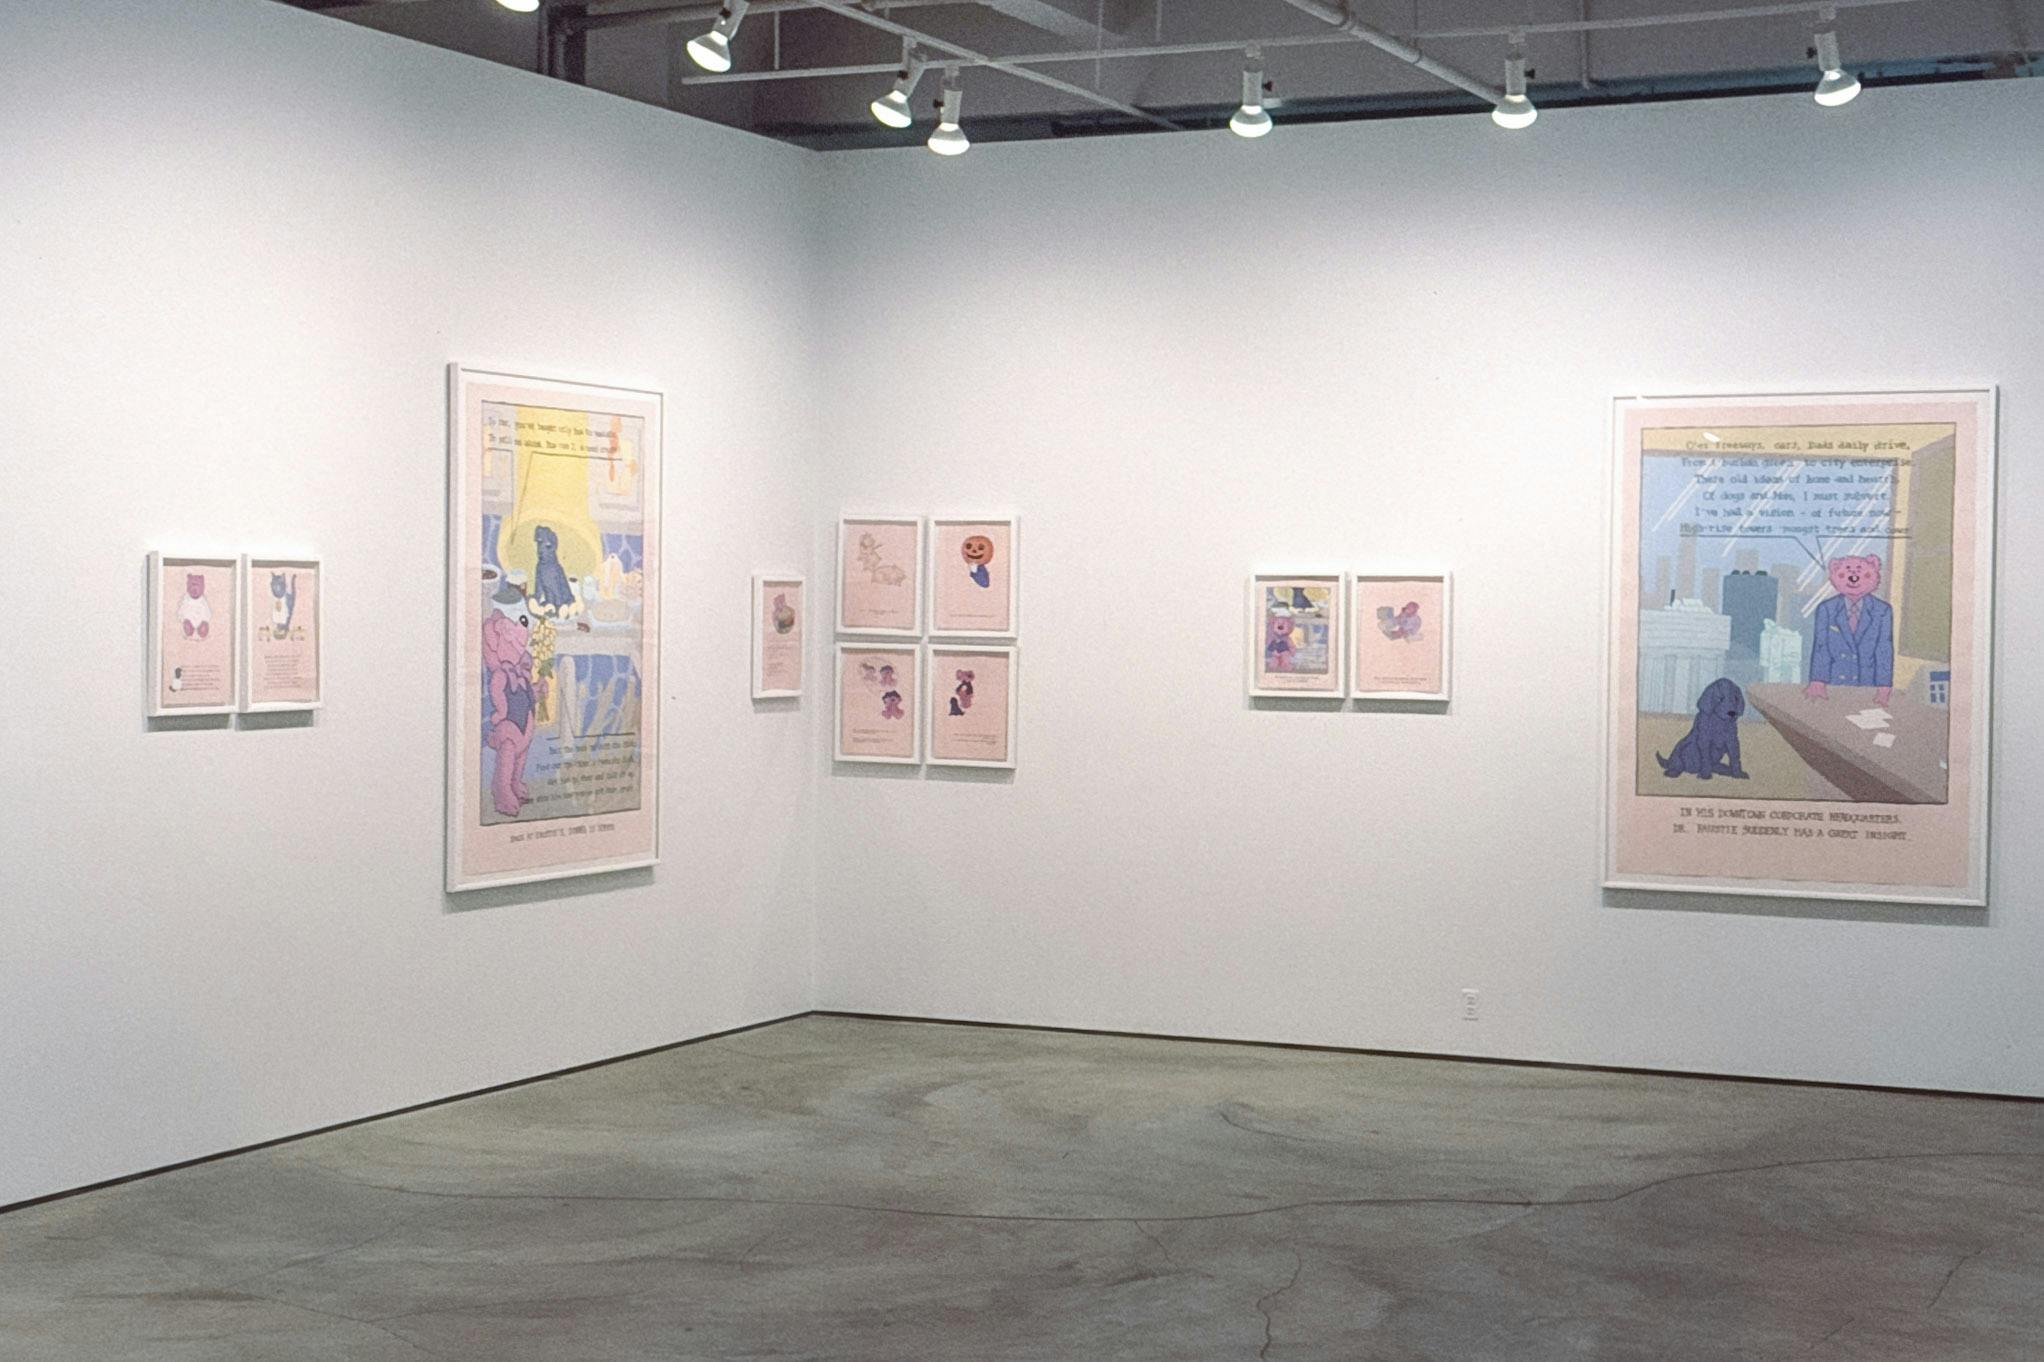 Eleven drawings are installed in the gallery. In a comic book style formatting, certain characters such as a pink bear dressed in blue and blue docs are repeatedly depicted in different scenes.